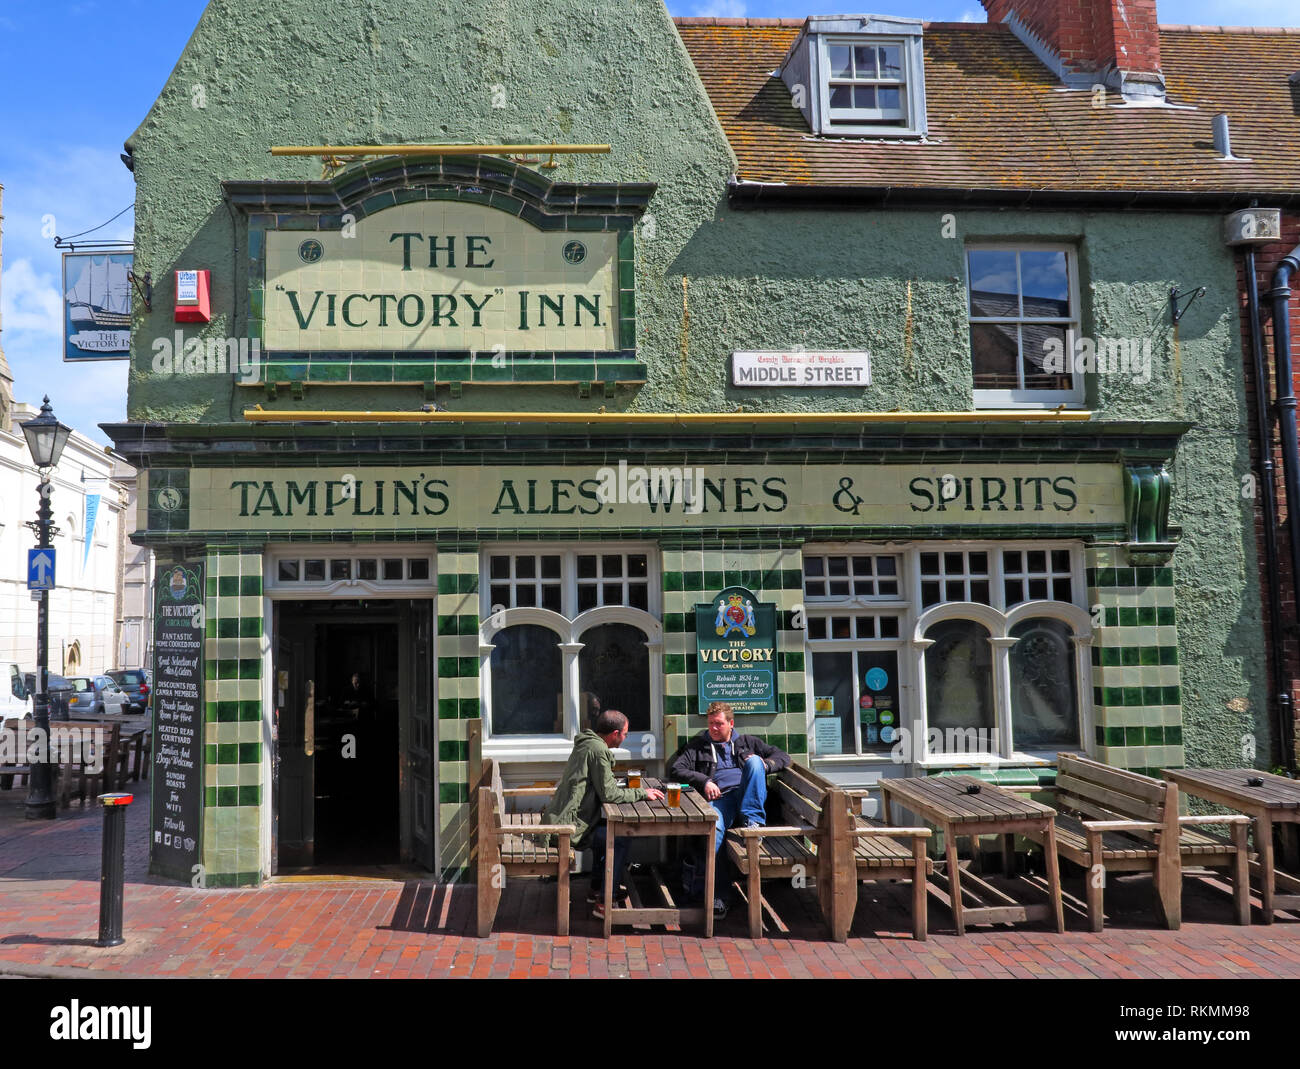 The Victory Inn, Tamplins Ales, Wines, Spirits, green tiled pub in Middle Street, Brighton, East Sussex, England, UK Stock Photo